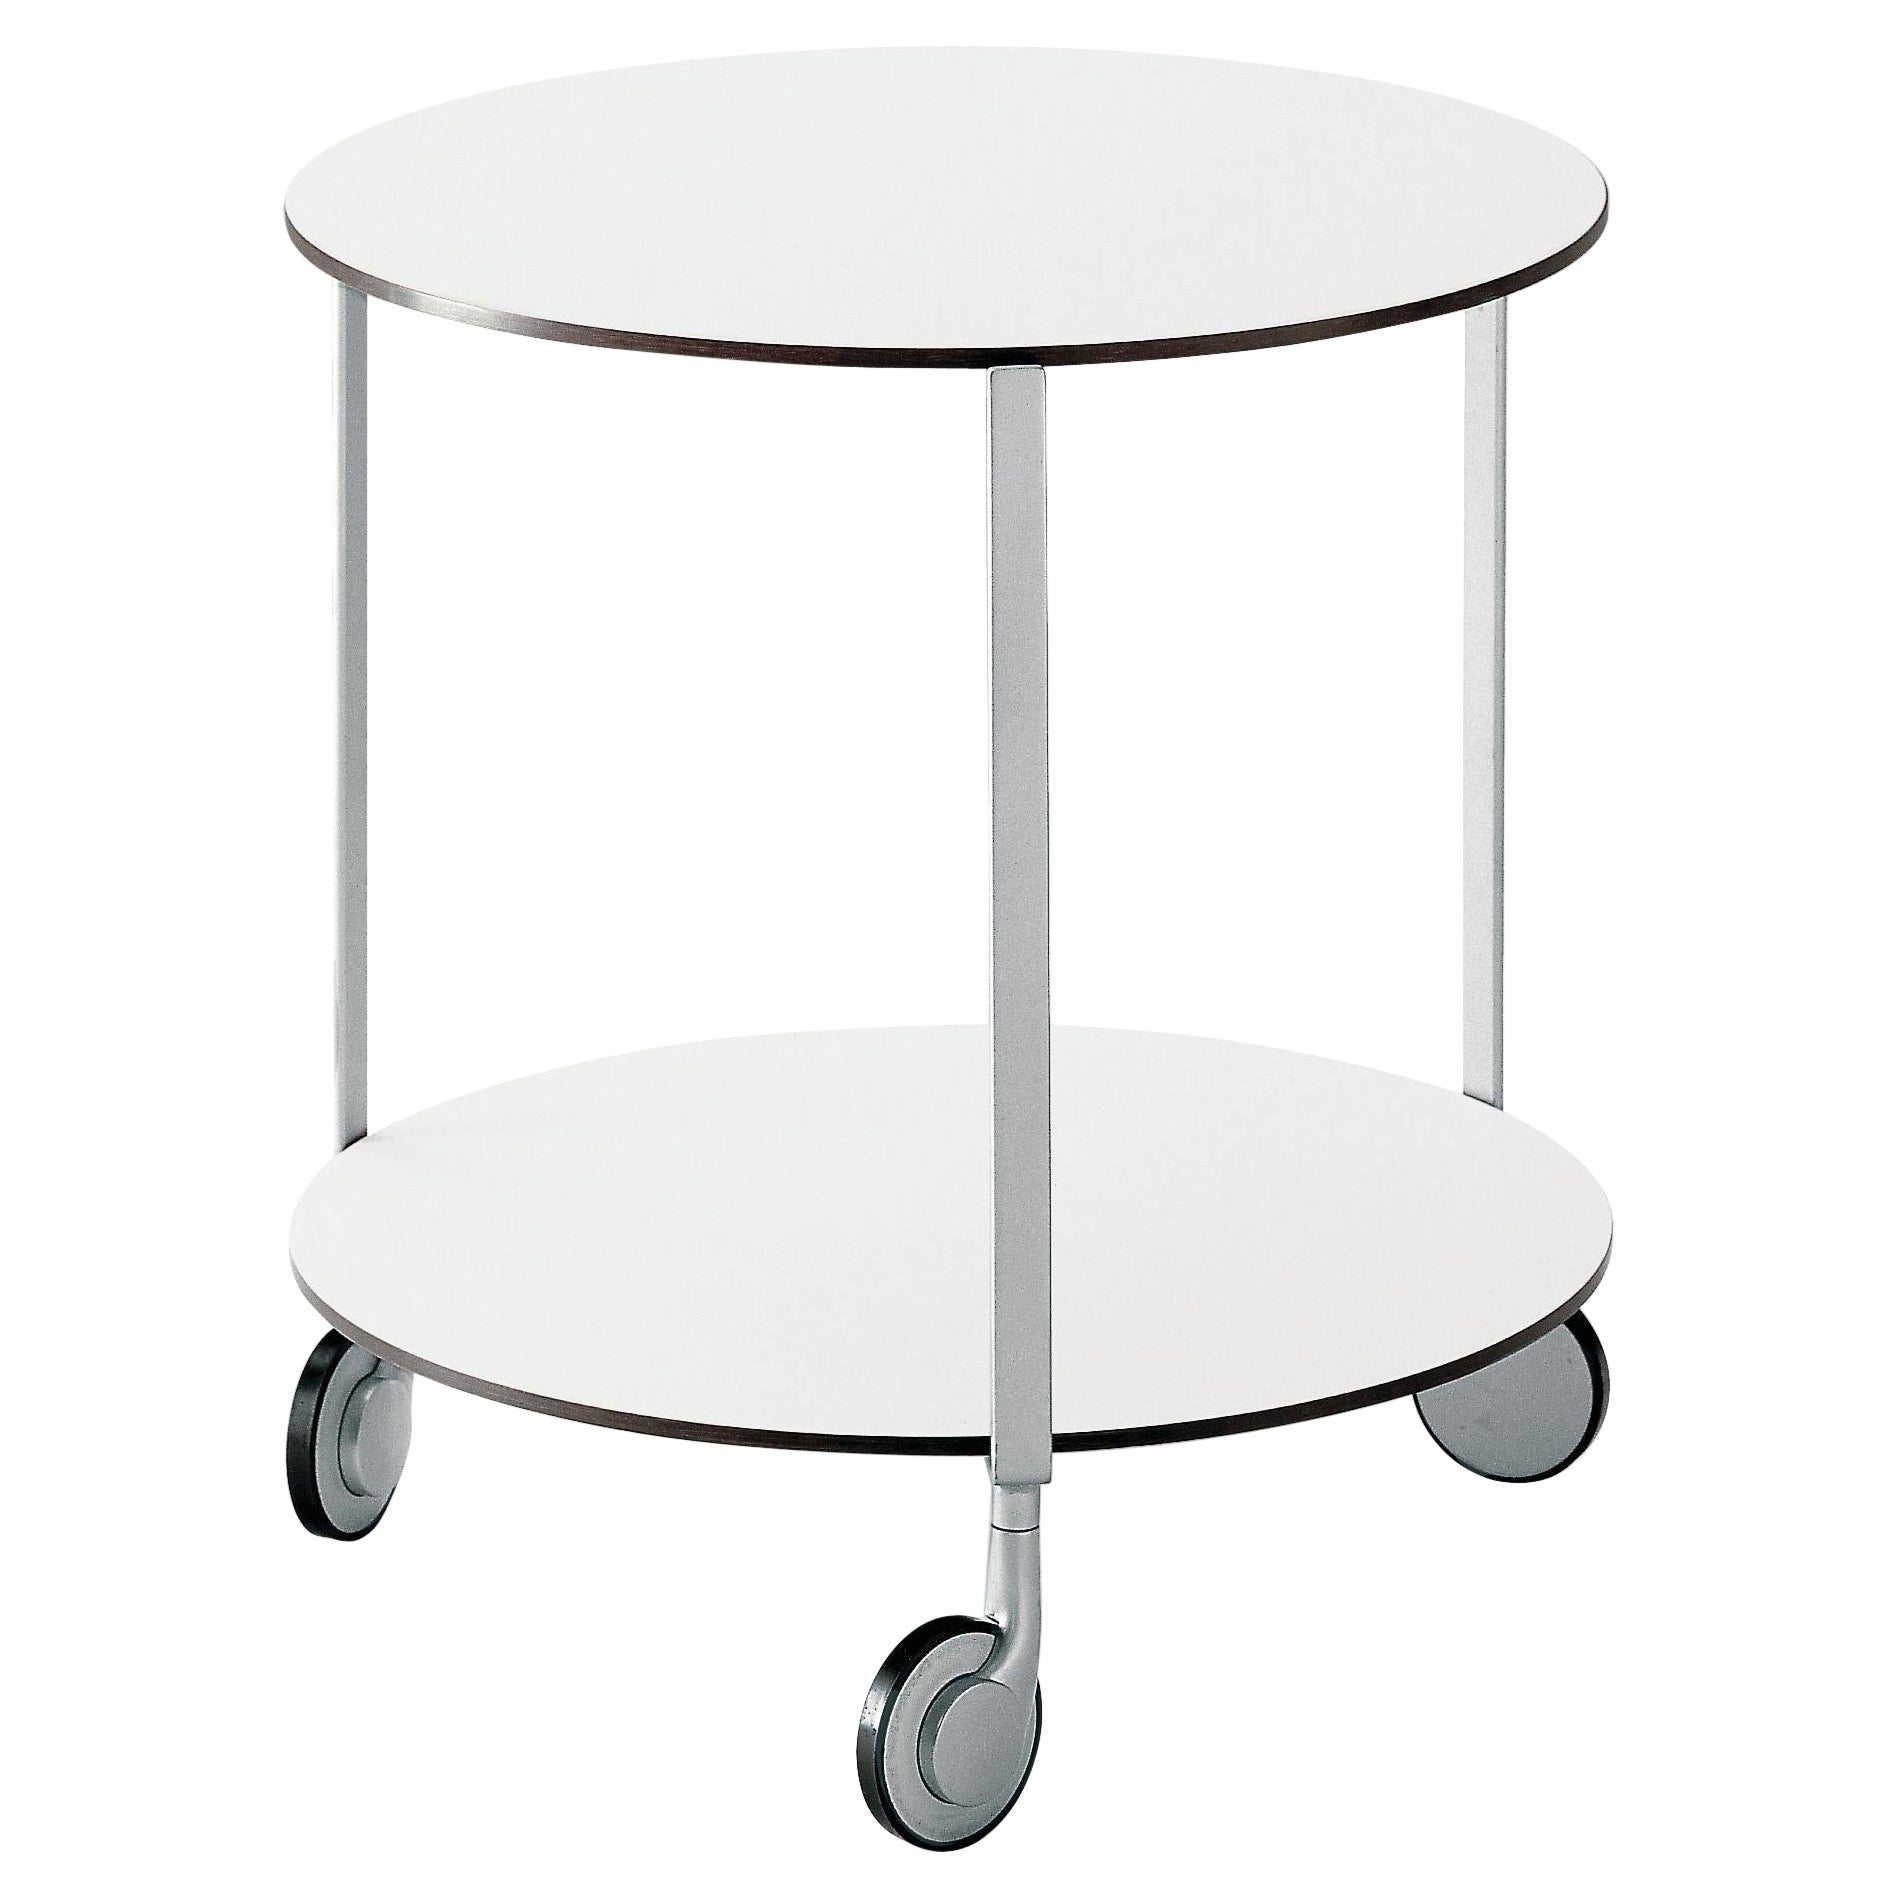 Zanotta Giro' Castor-Mounted Small Table with White Plastic Top by Anna Deplano For Sale